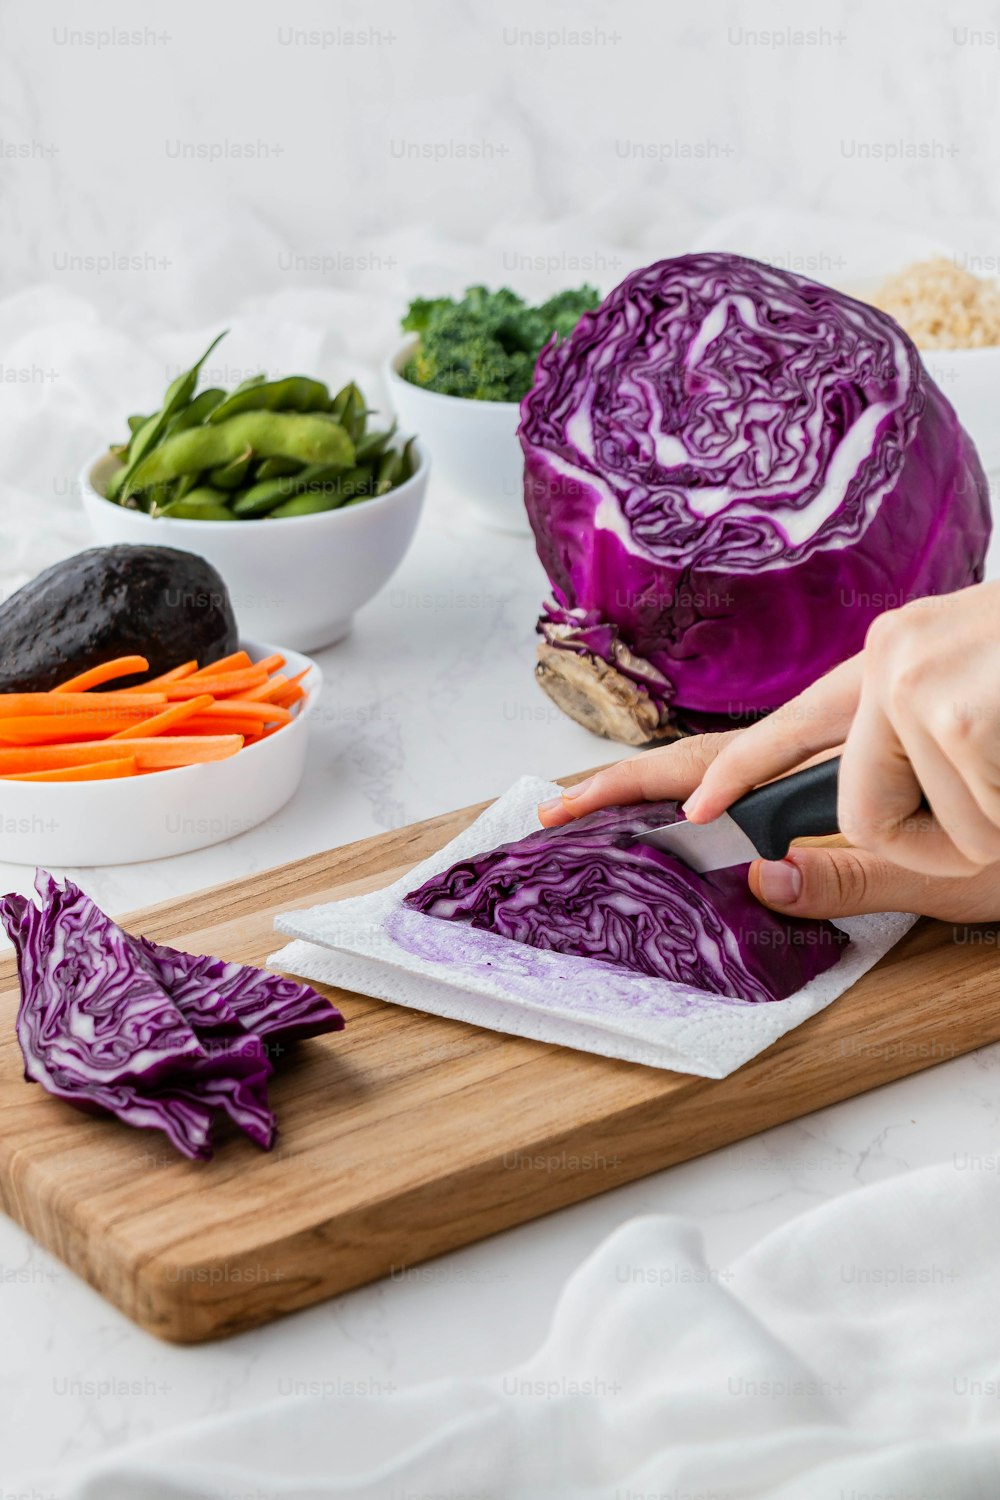 a person cutting up a cabbage on a cutting board